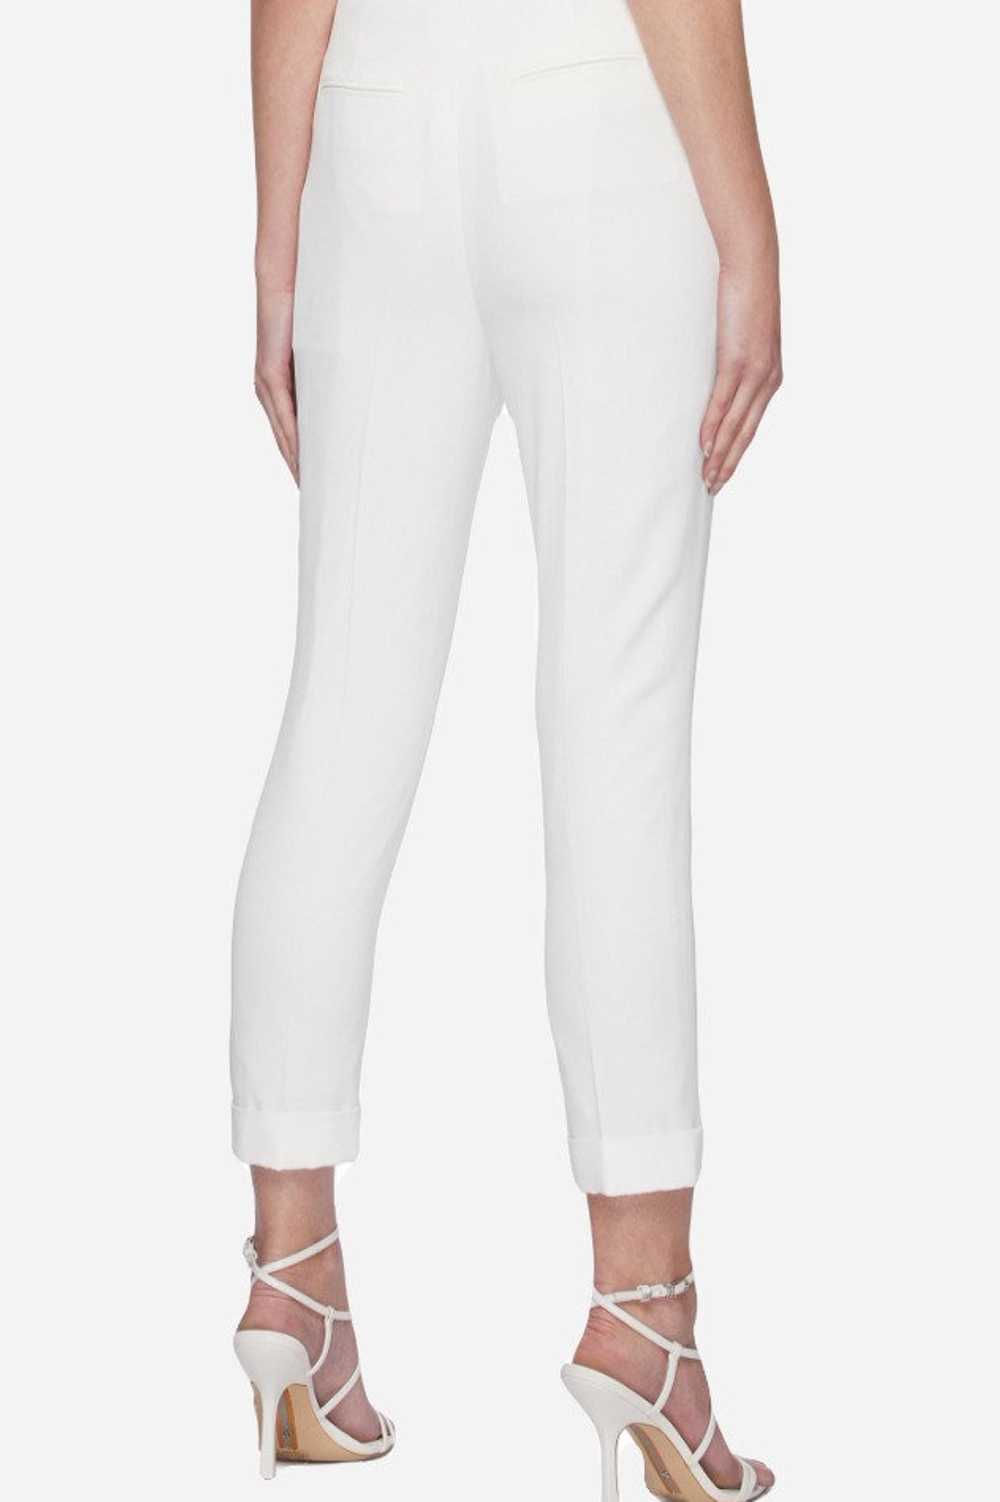 Alexander Mcqueen Cropped Tailored Trouser UK 12 - image 2